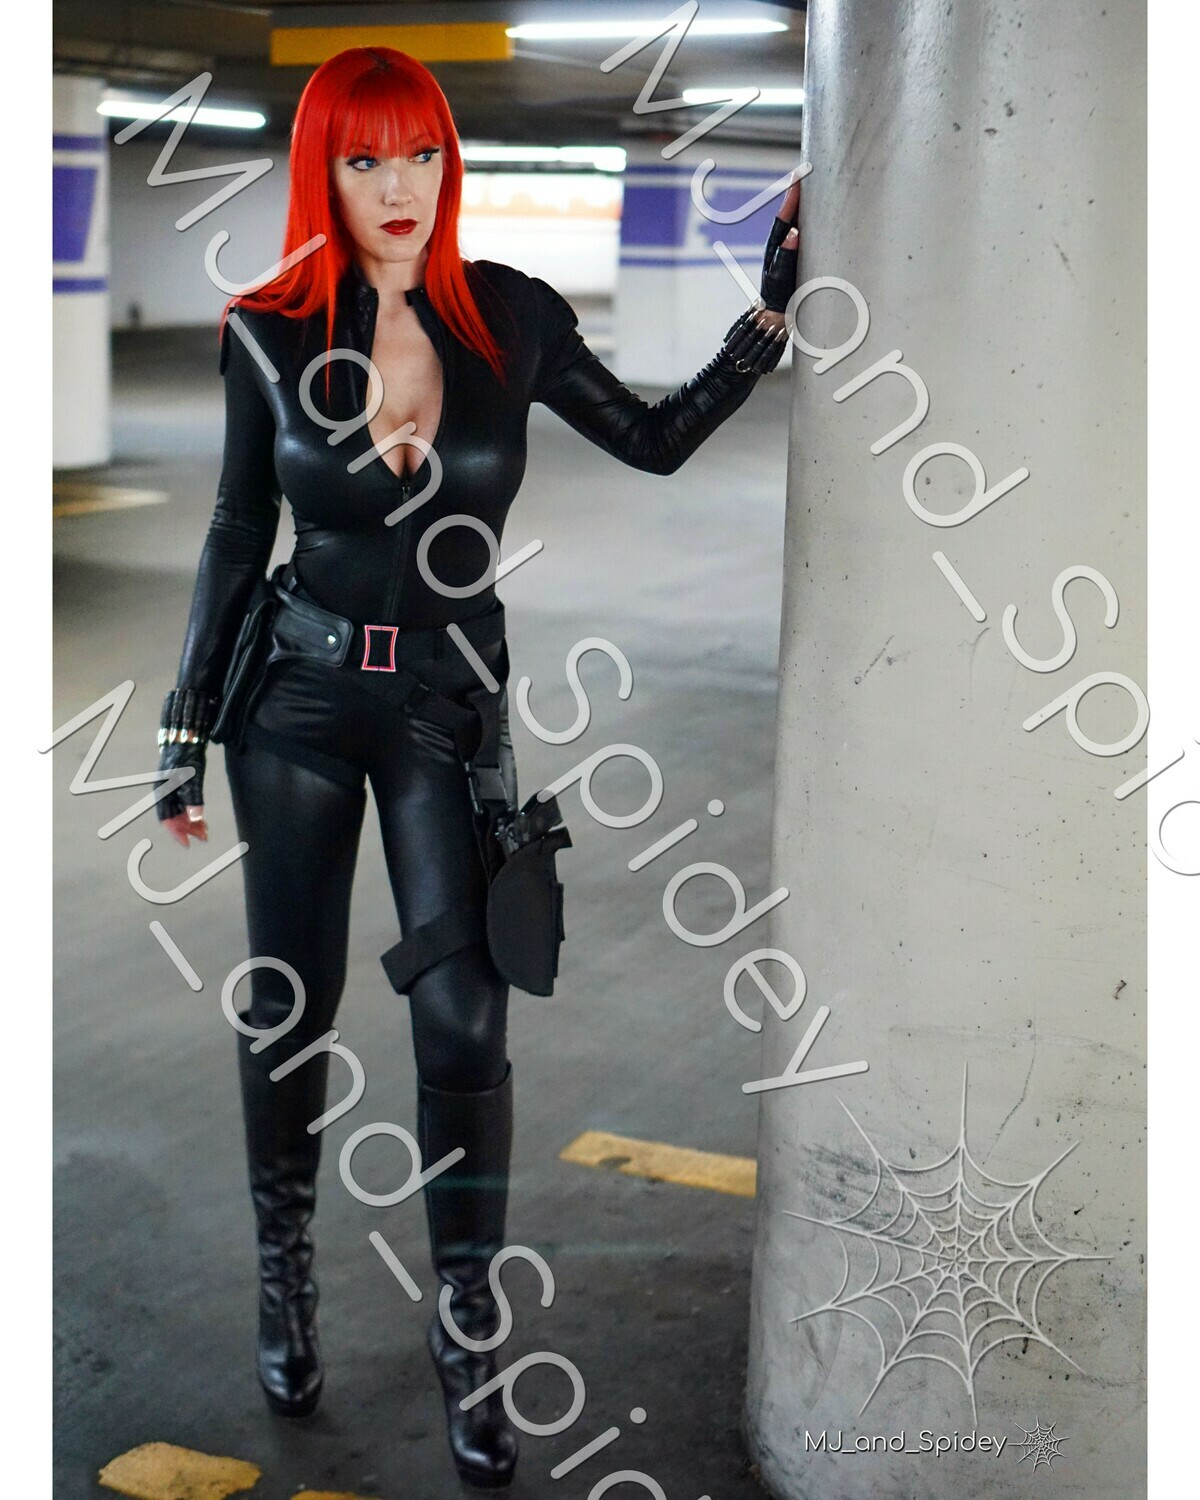 Marvel - Avengers - Black Widow No. 6 - Digital Cosplay Image (@MJ_and_Spidey, MJ and Spidey, Comics)